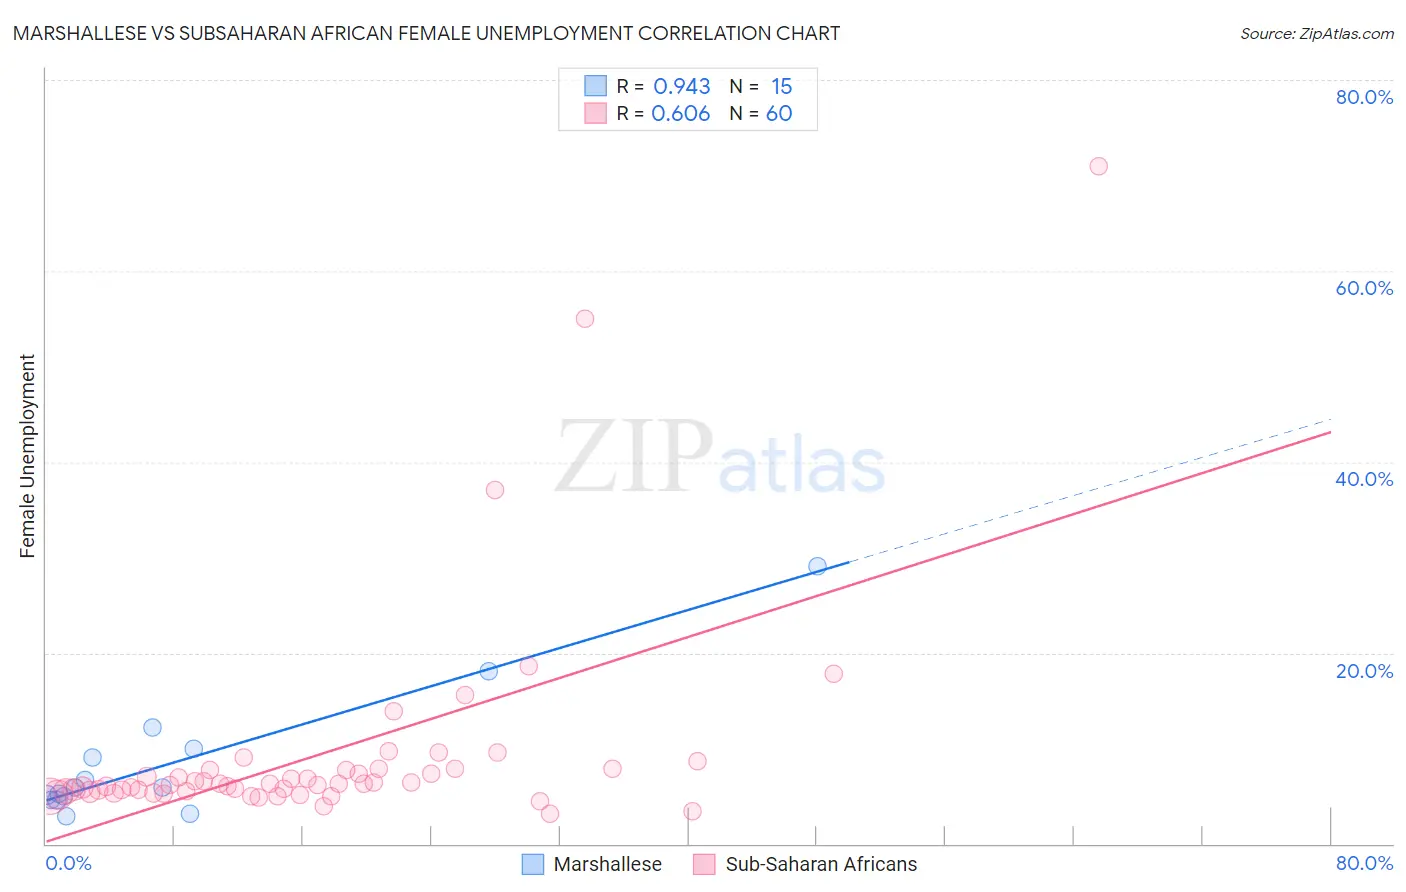 Marshallese vs Subsaharan African Female Unemployment